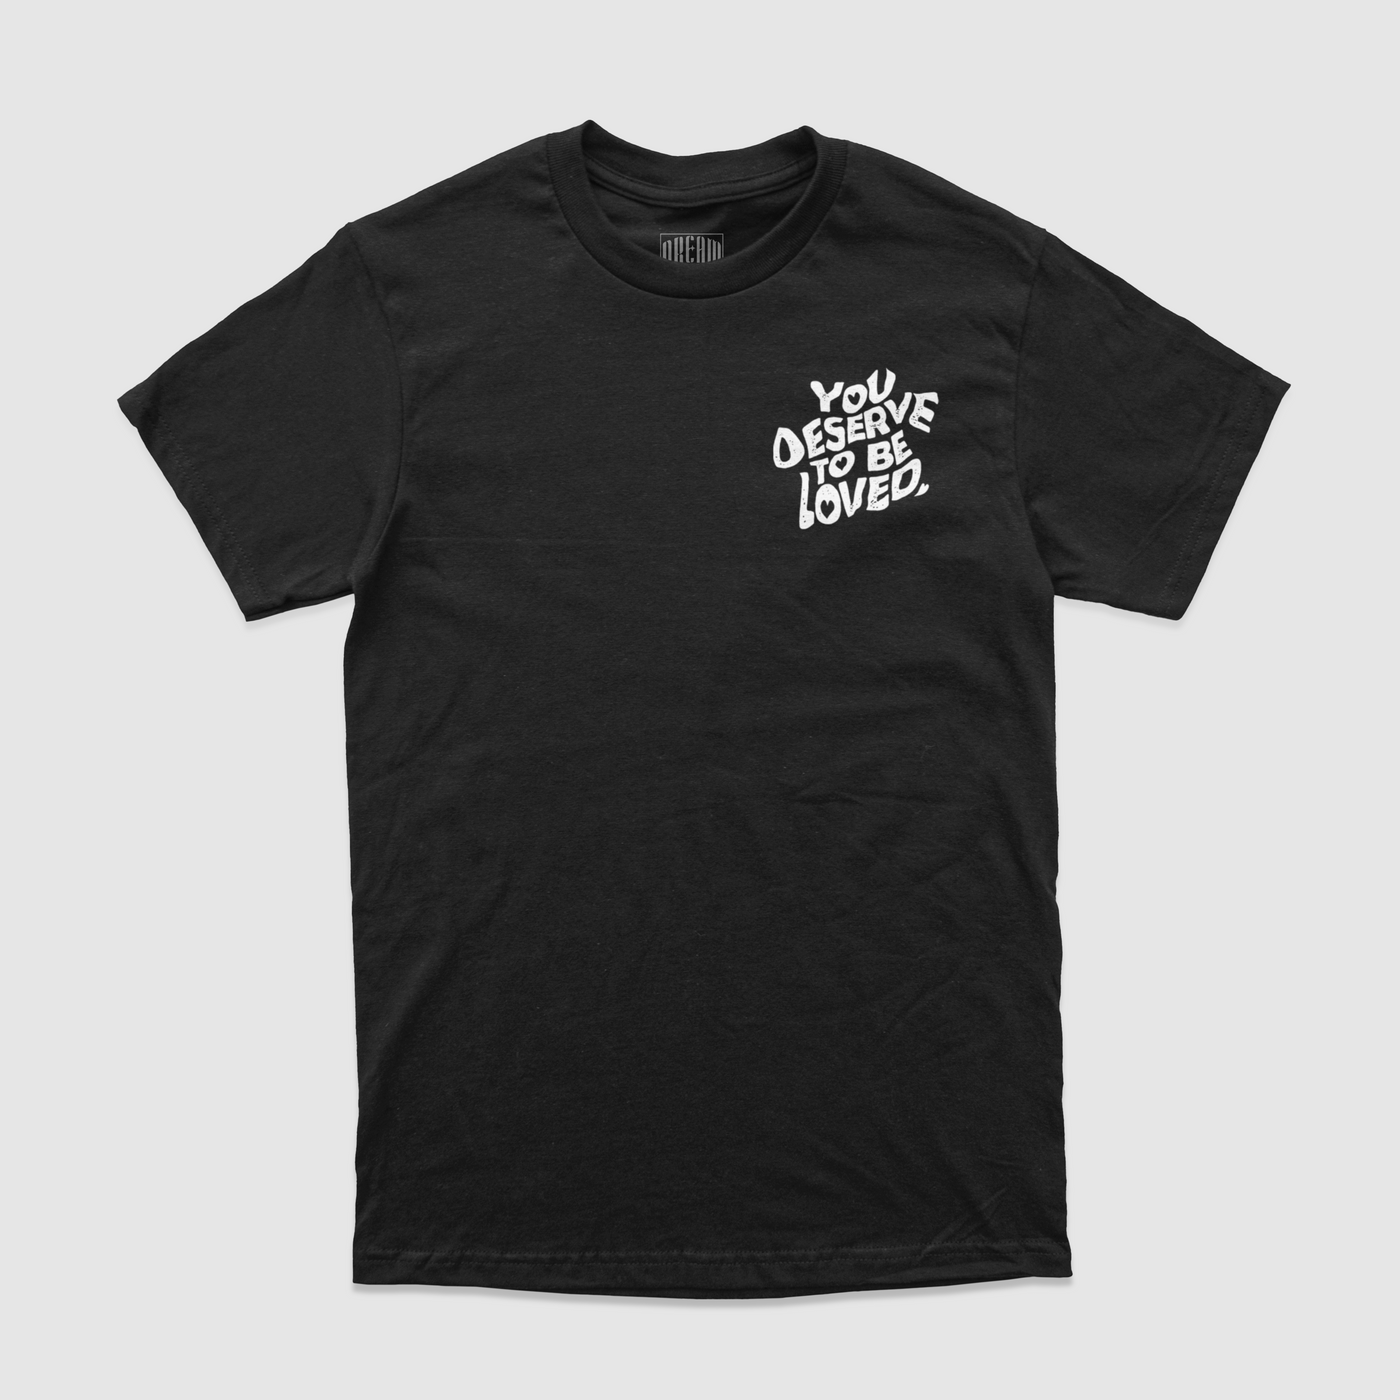 You Deserve To Be Loved Black Tee

Thank you for existing. You're worth far more than you could imagine. Believe in yourself and the imprint you're leaving on this world and those around you. You deDREAM Clothing 